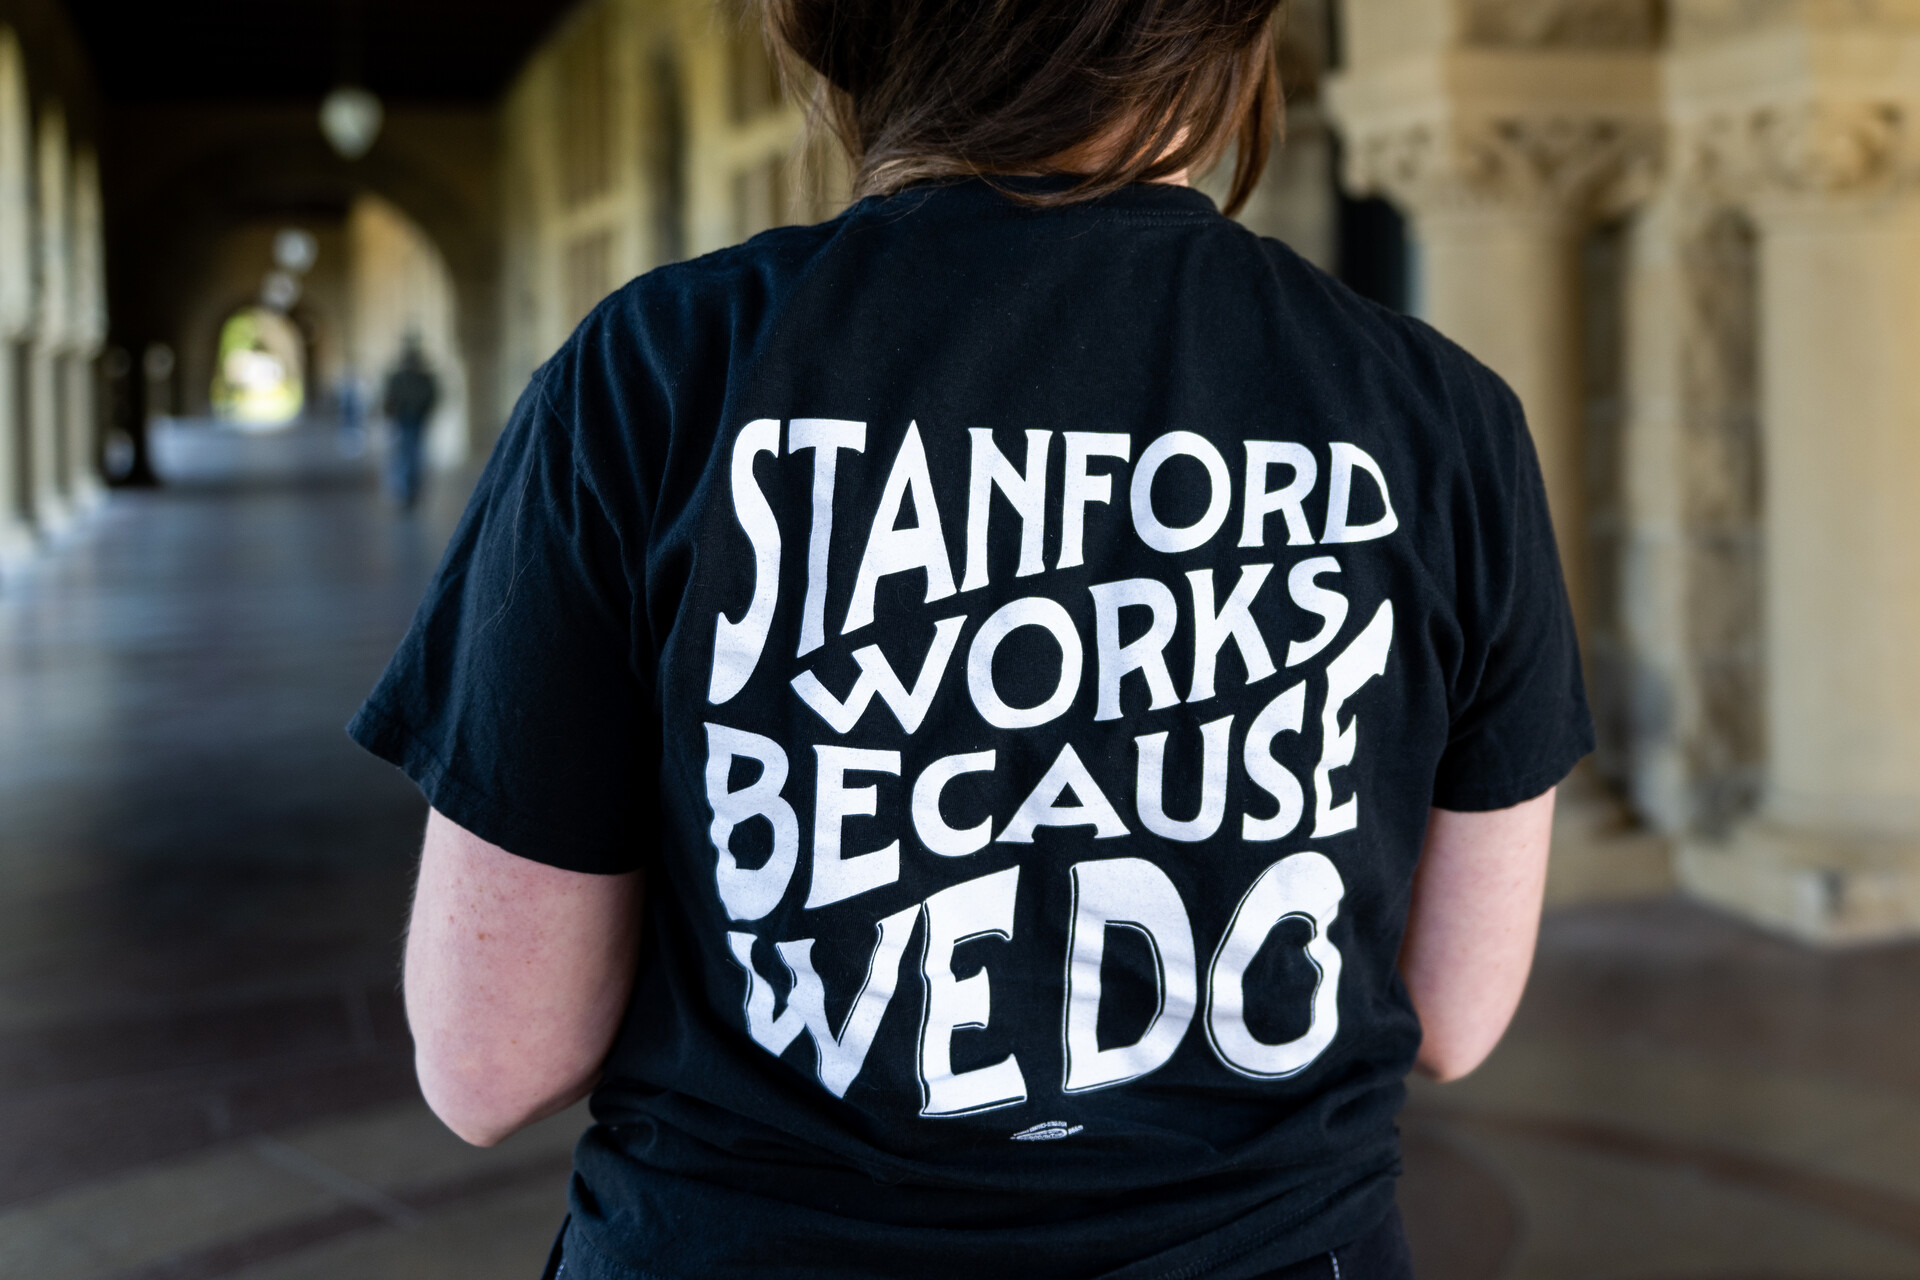 A shot of the back of a woman's black T-shirt that reads, "Stanford works because we do."